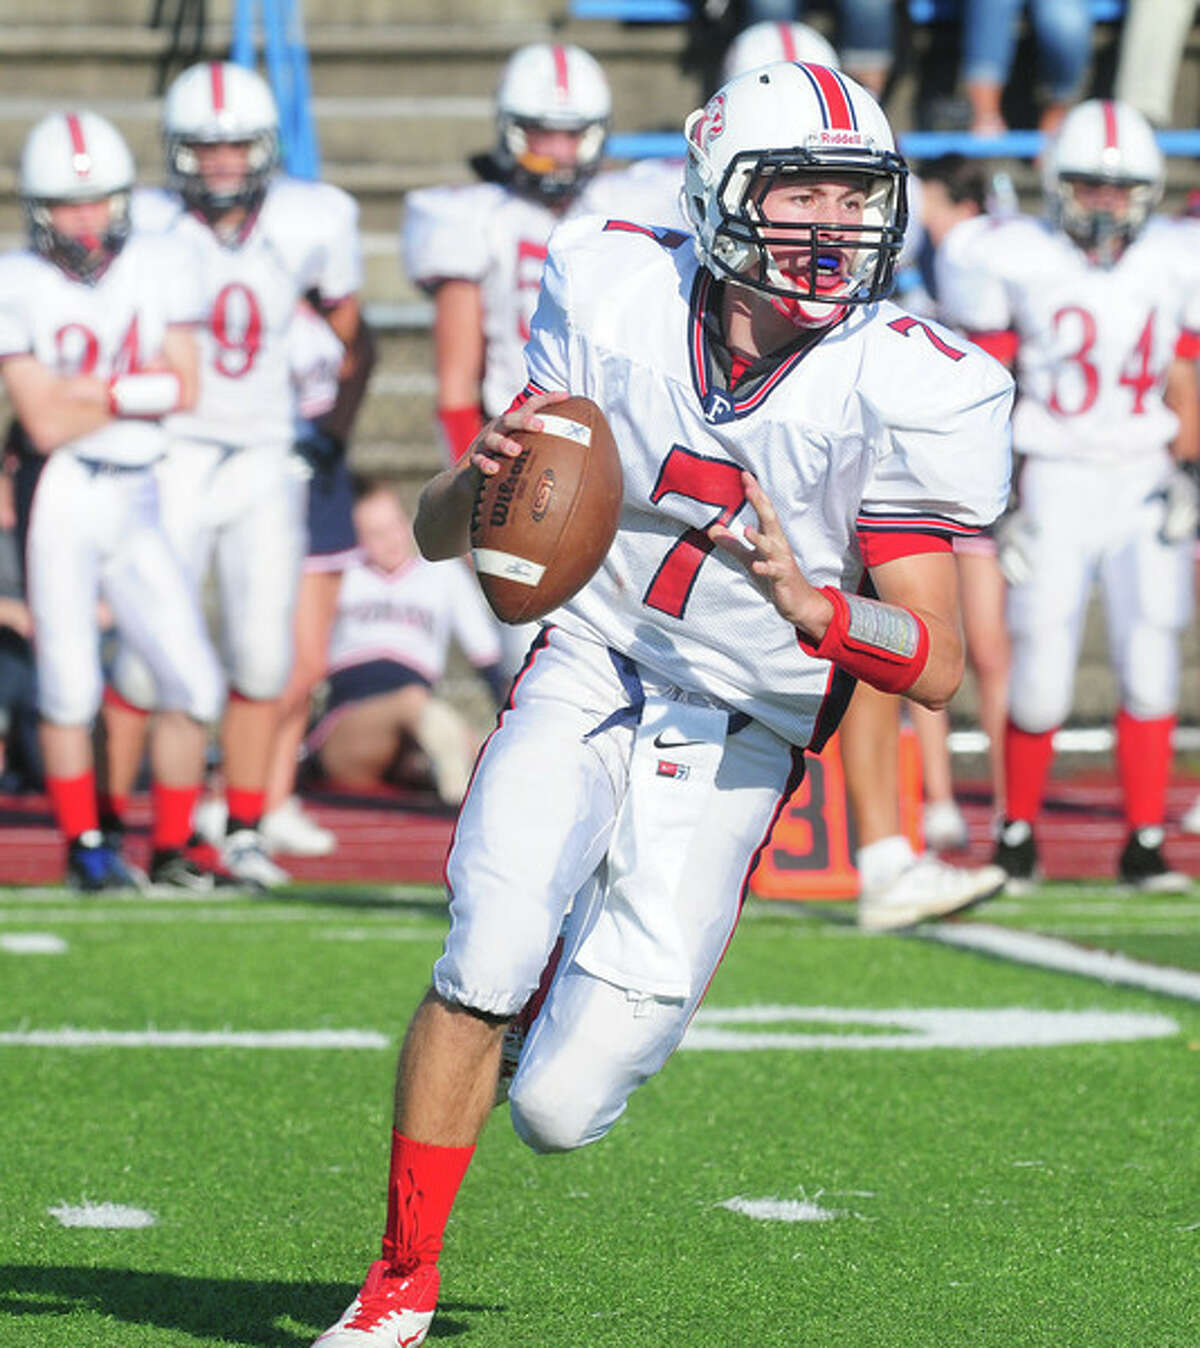 Jake Kasuba, who was one of the state’s most prolific passers (2,918 yards and 27 TDs) returns to guide the Lions in 2014. (Photo Arnold Gold – Register)